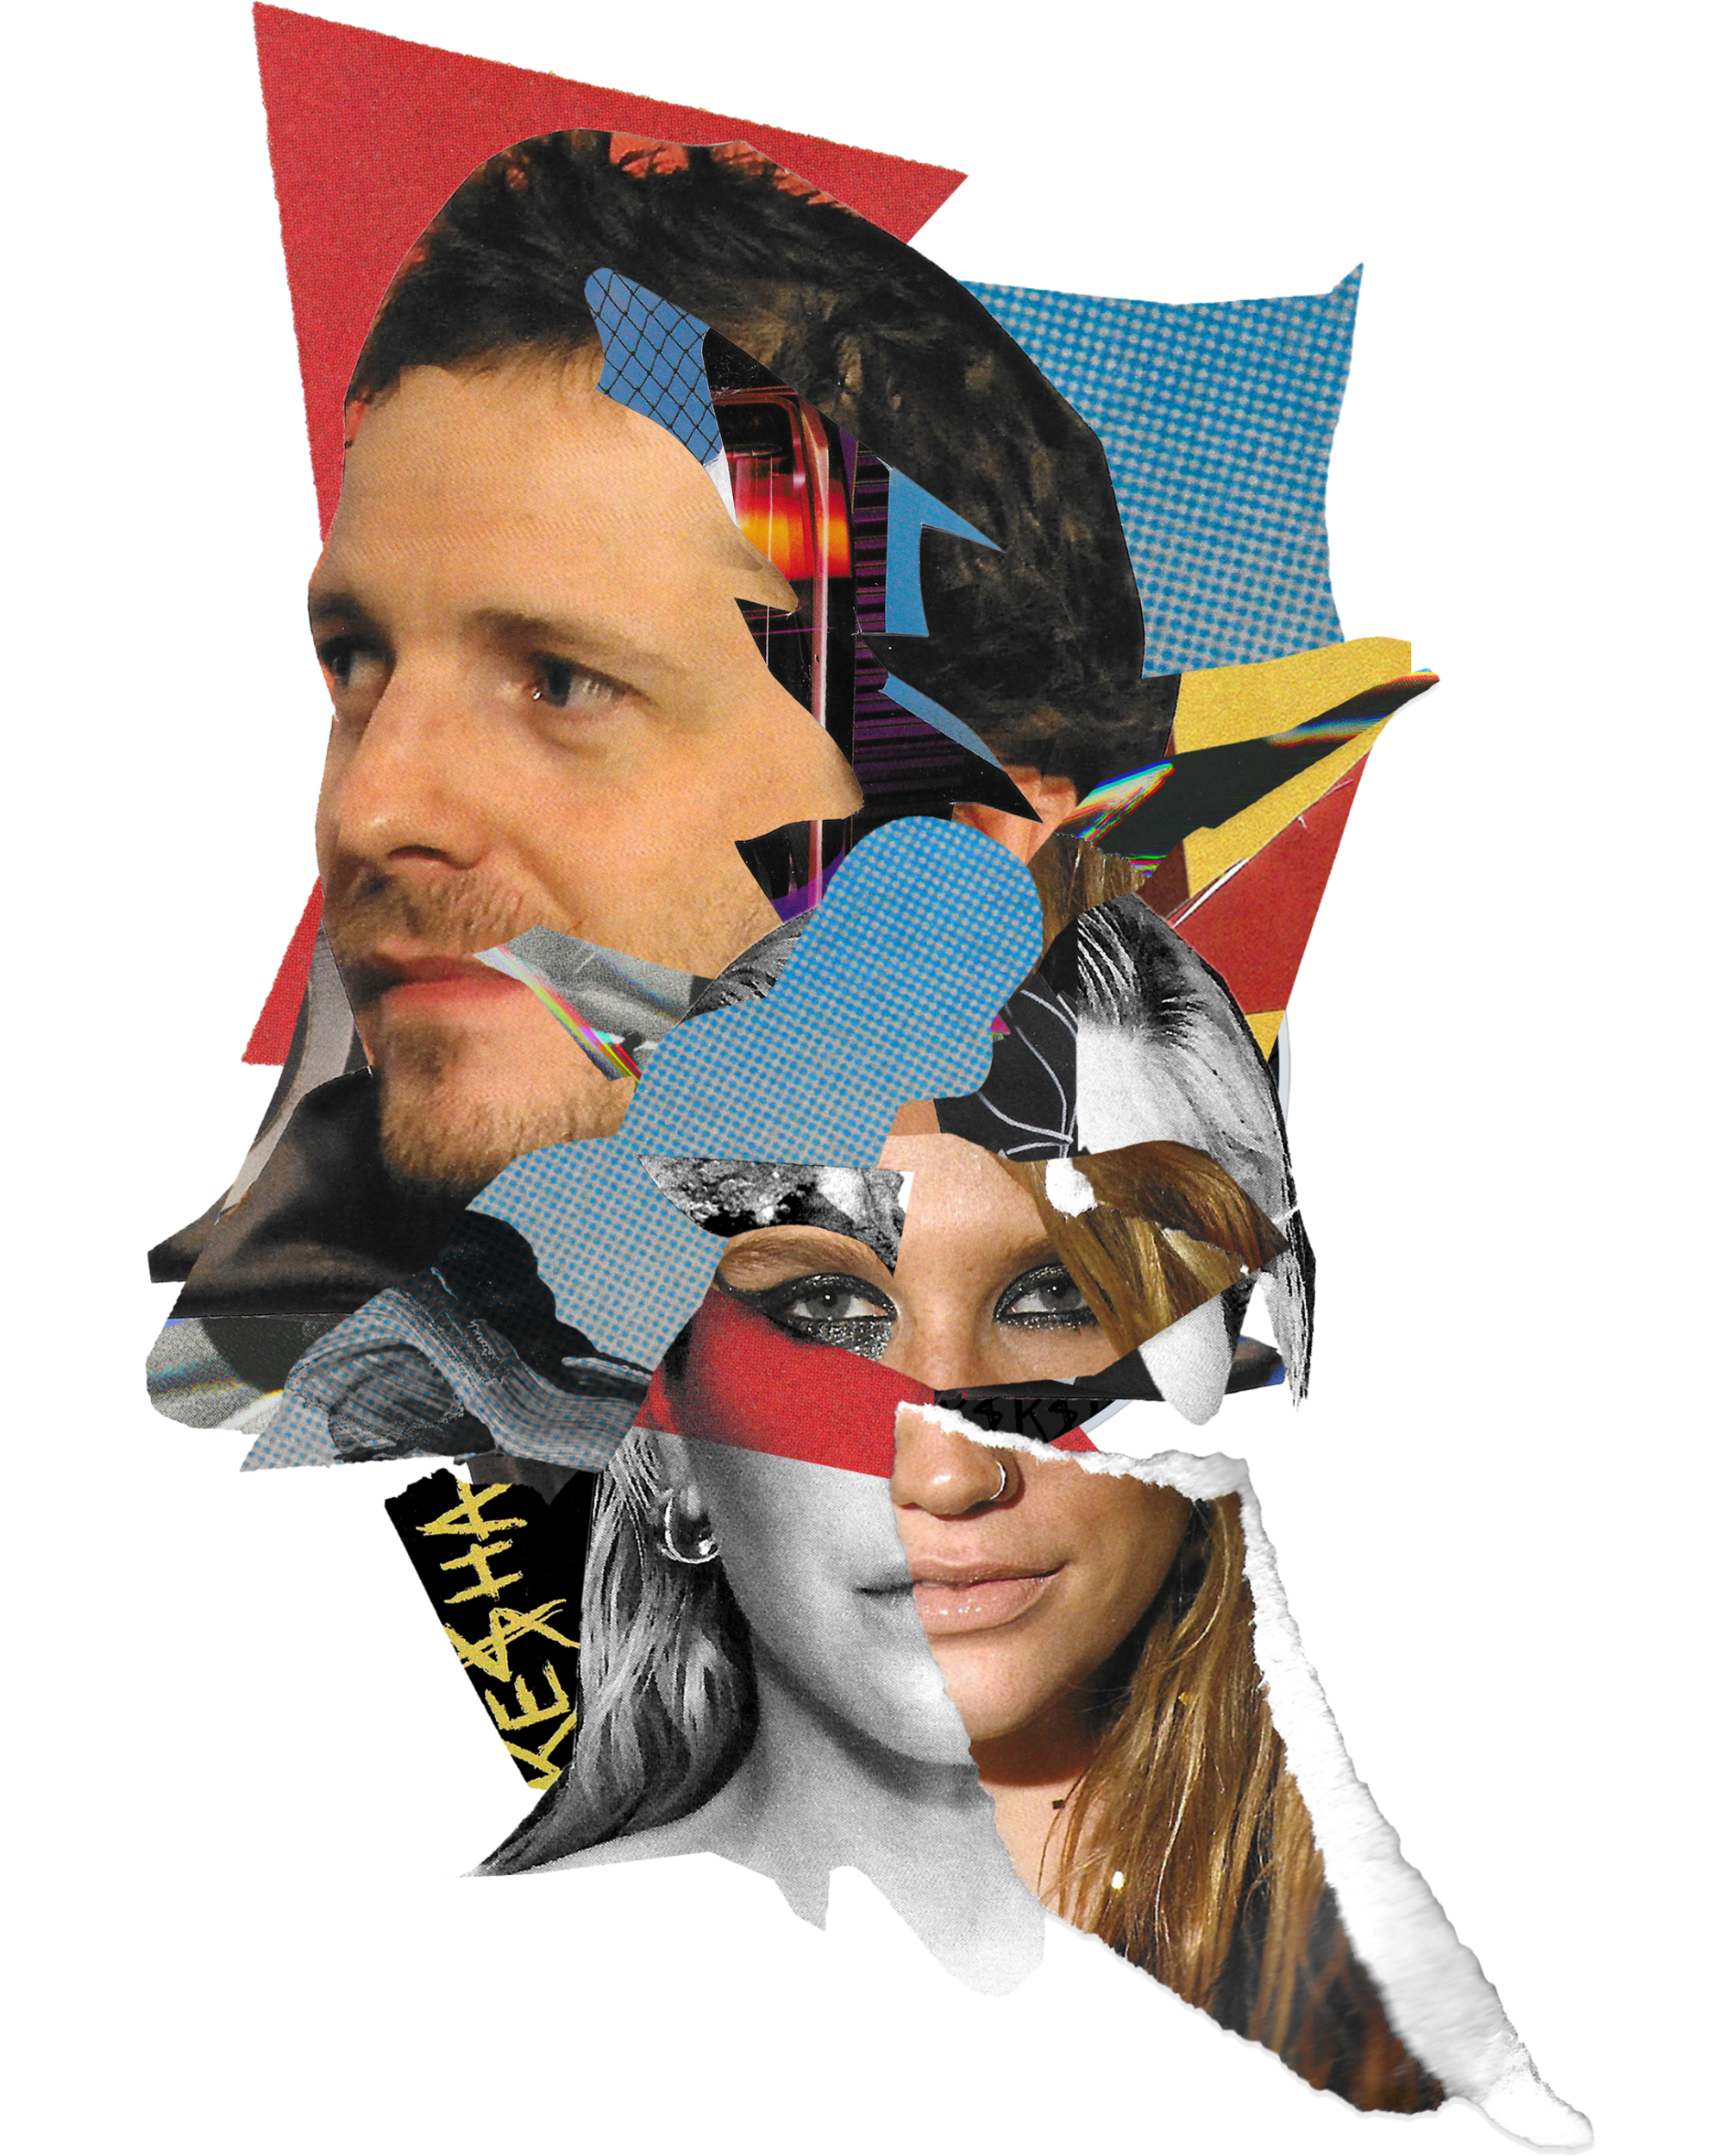 Cutouts of pieces of colorful paper and photographs of Dr Luke and Kesha collaged together.